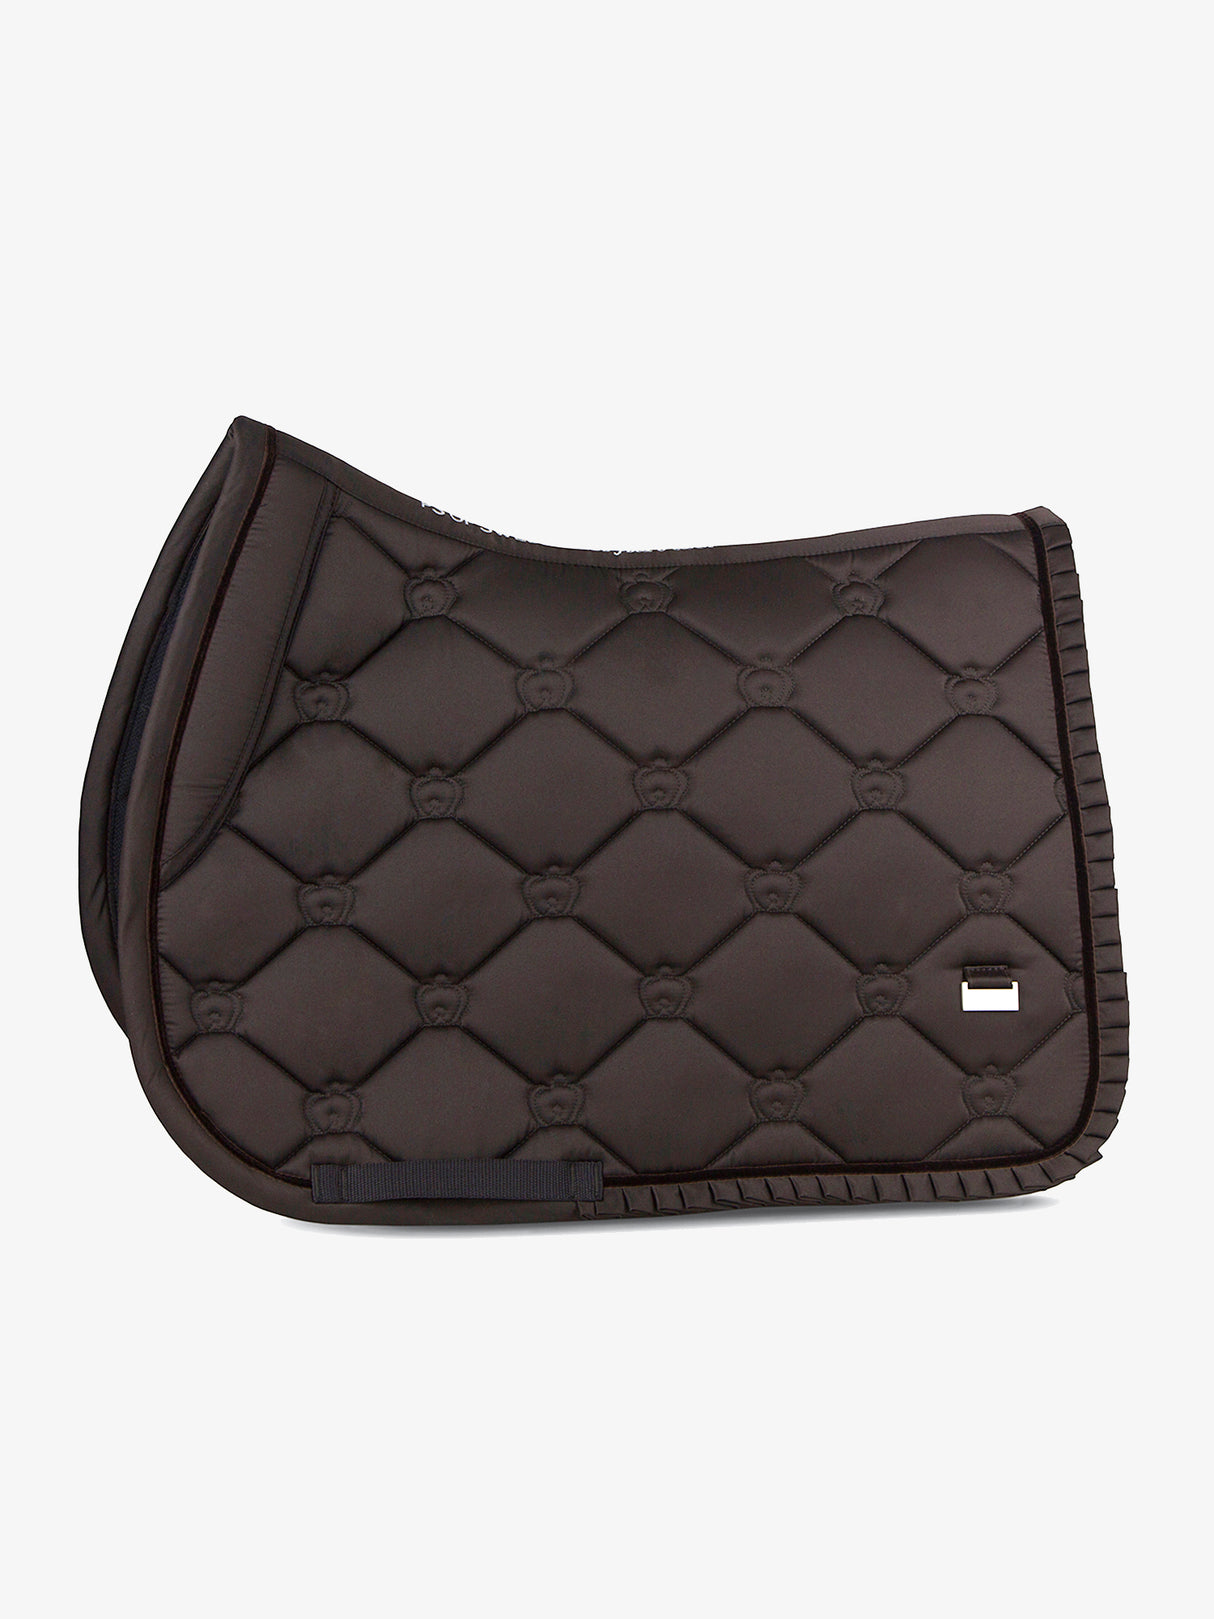 PS of Sweden Ruffle Jump Saddle Pad Coffee